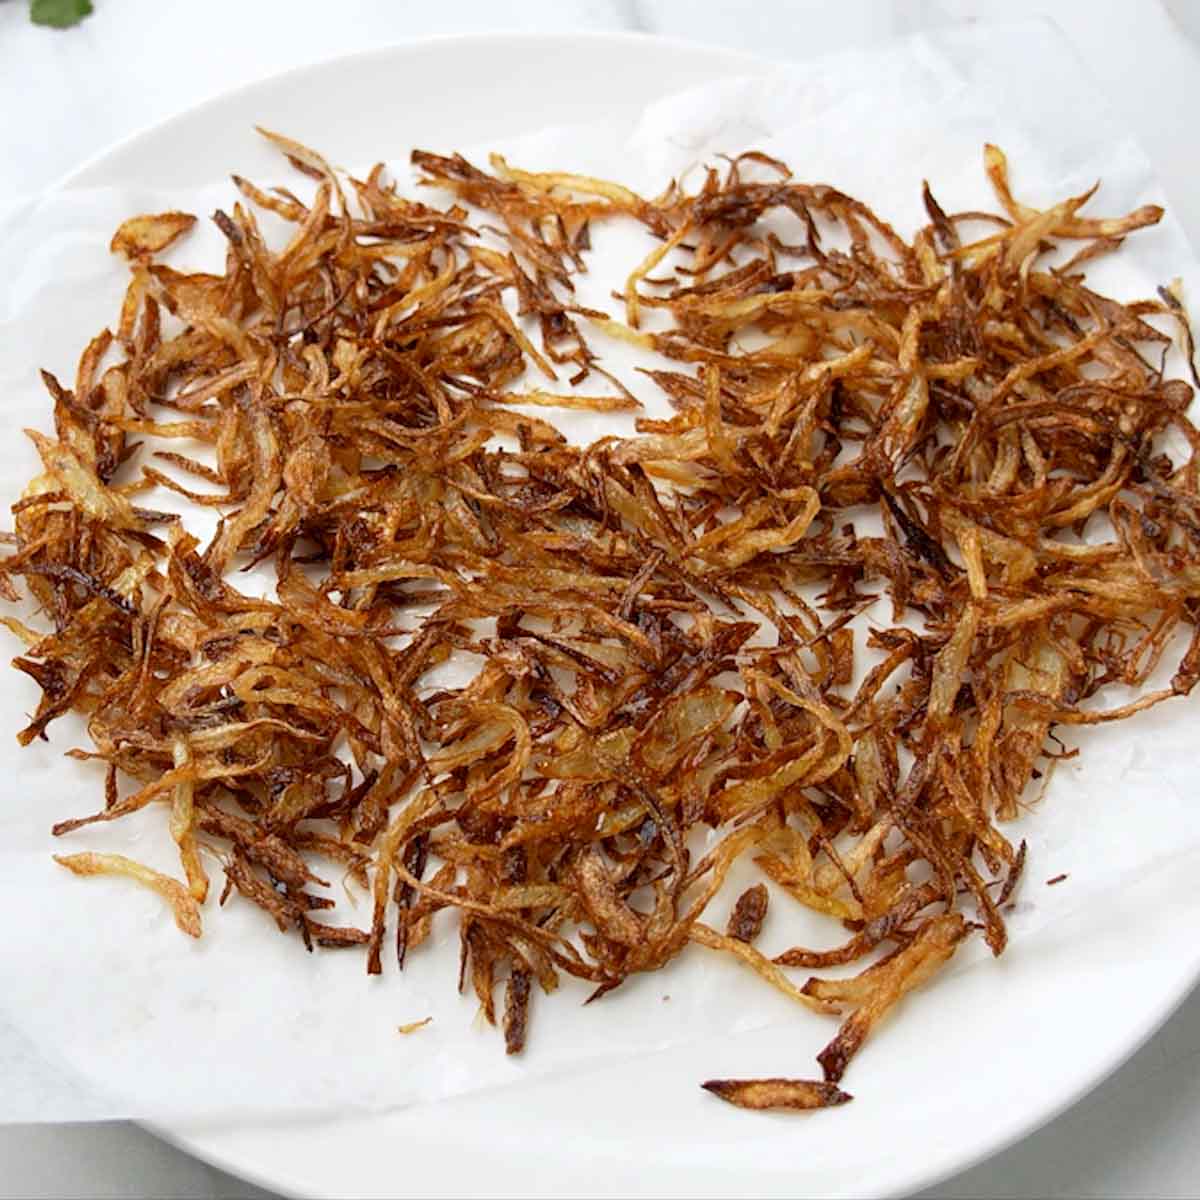 spread out fried onions to make them crispy